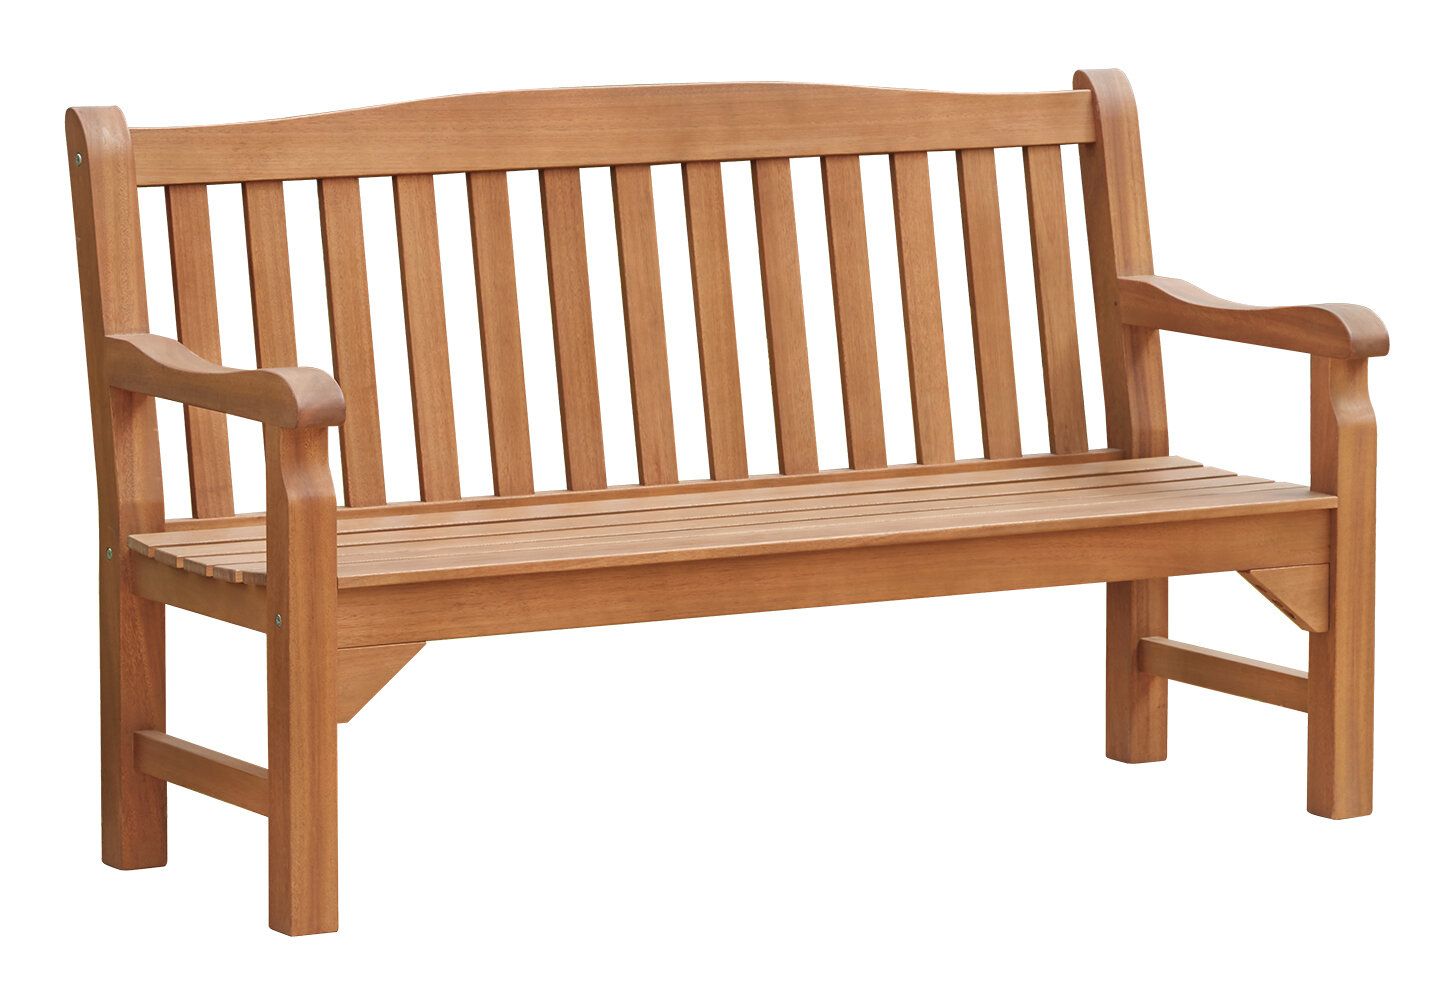 Wooden Garden Bench With Amabel Wooden Garden Benches (View 14 of 25)